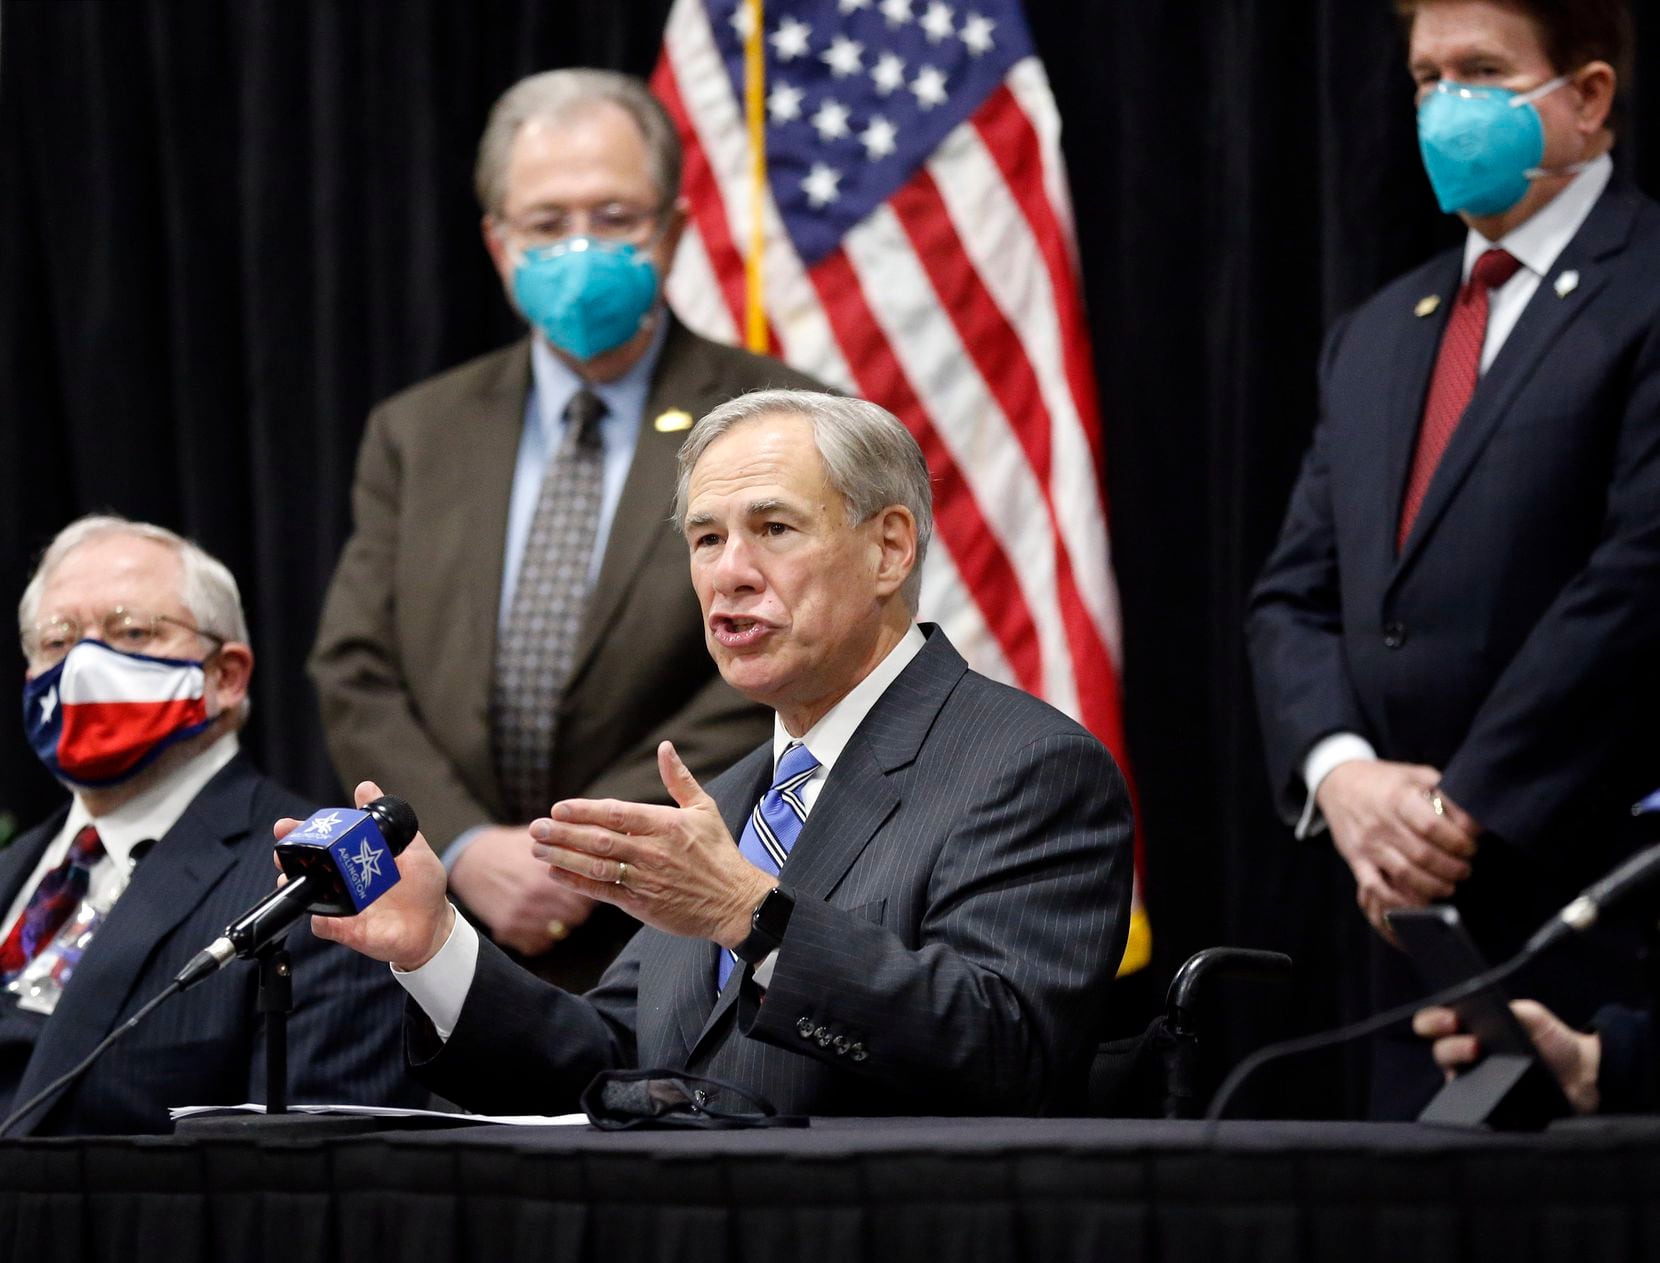 Alongside local and state officials, Texas Governor Greg Abbott provided an update on COVID-19 vaccine efforts in Texas following the tour of a mass COVID-19 vaccination site inside Esports Stadium Arlington & Expo Center in Arlington, Texas, Monday, January 11, 2021.  (Tom Fox/The Dallas Morning News) 